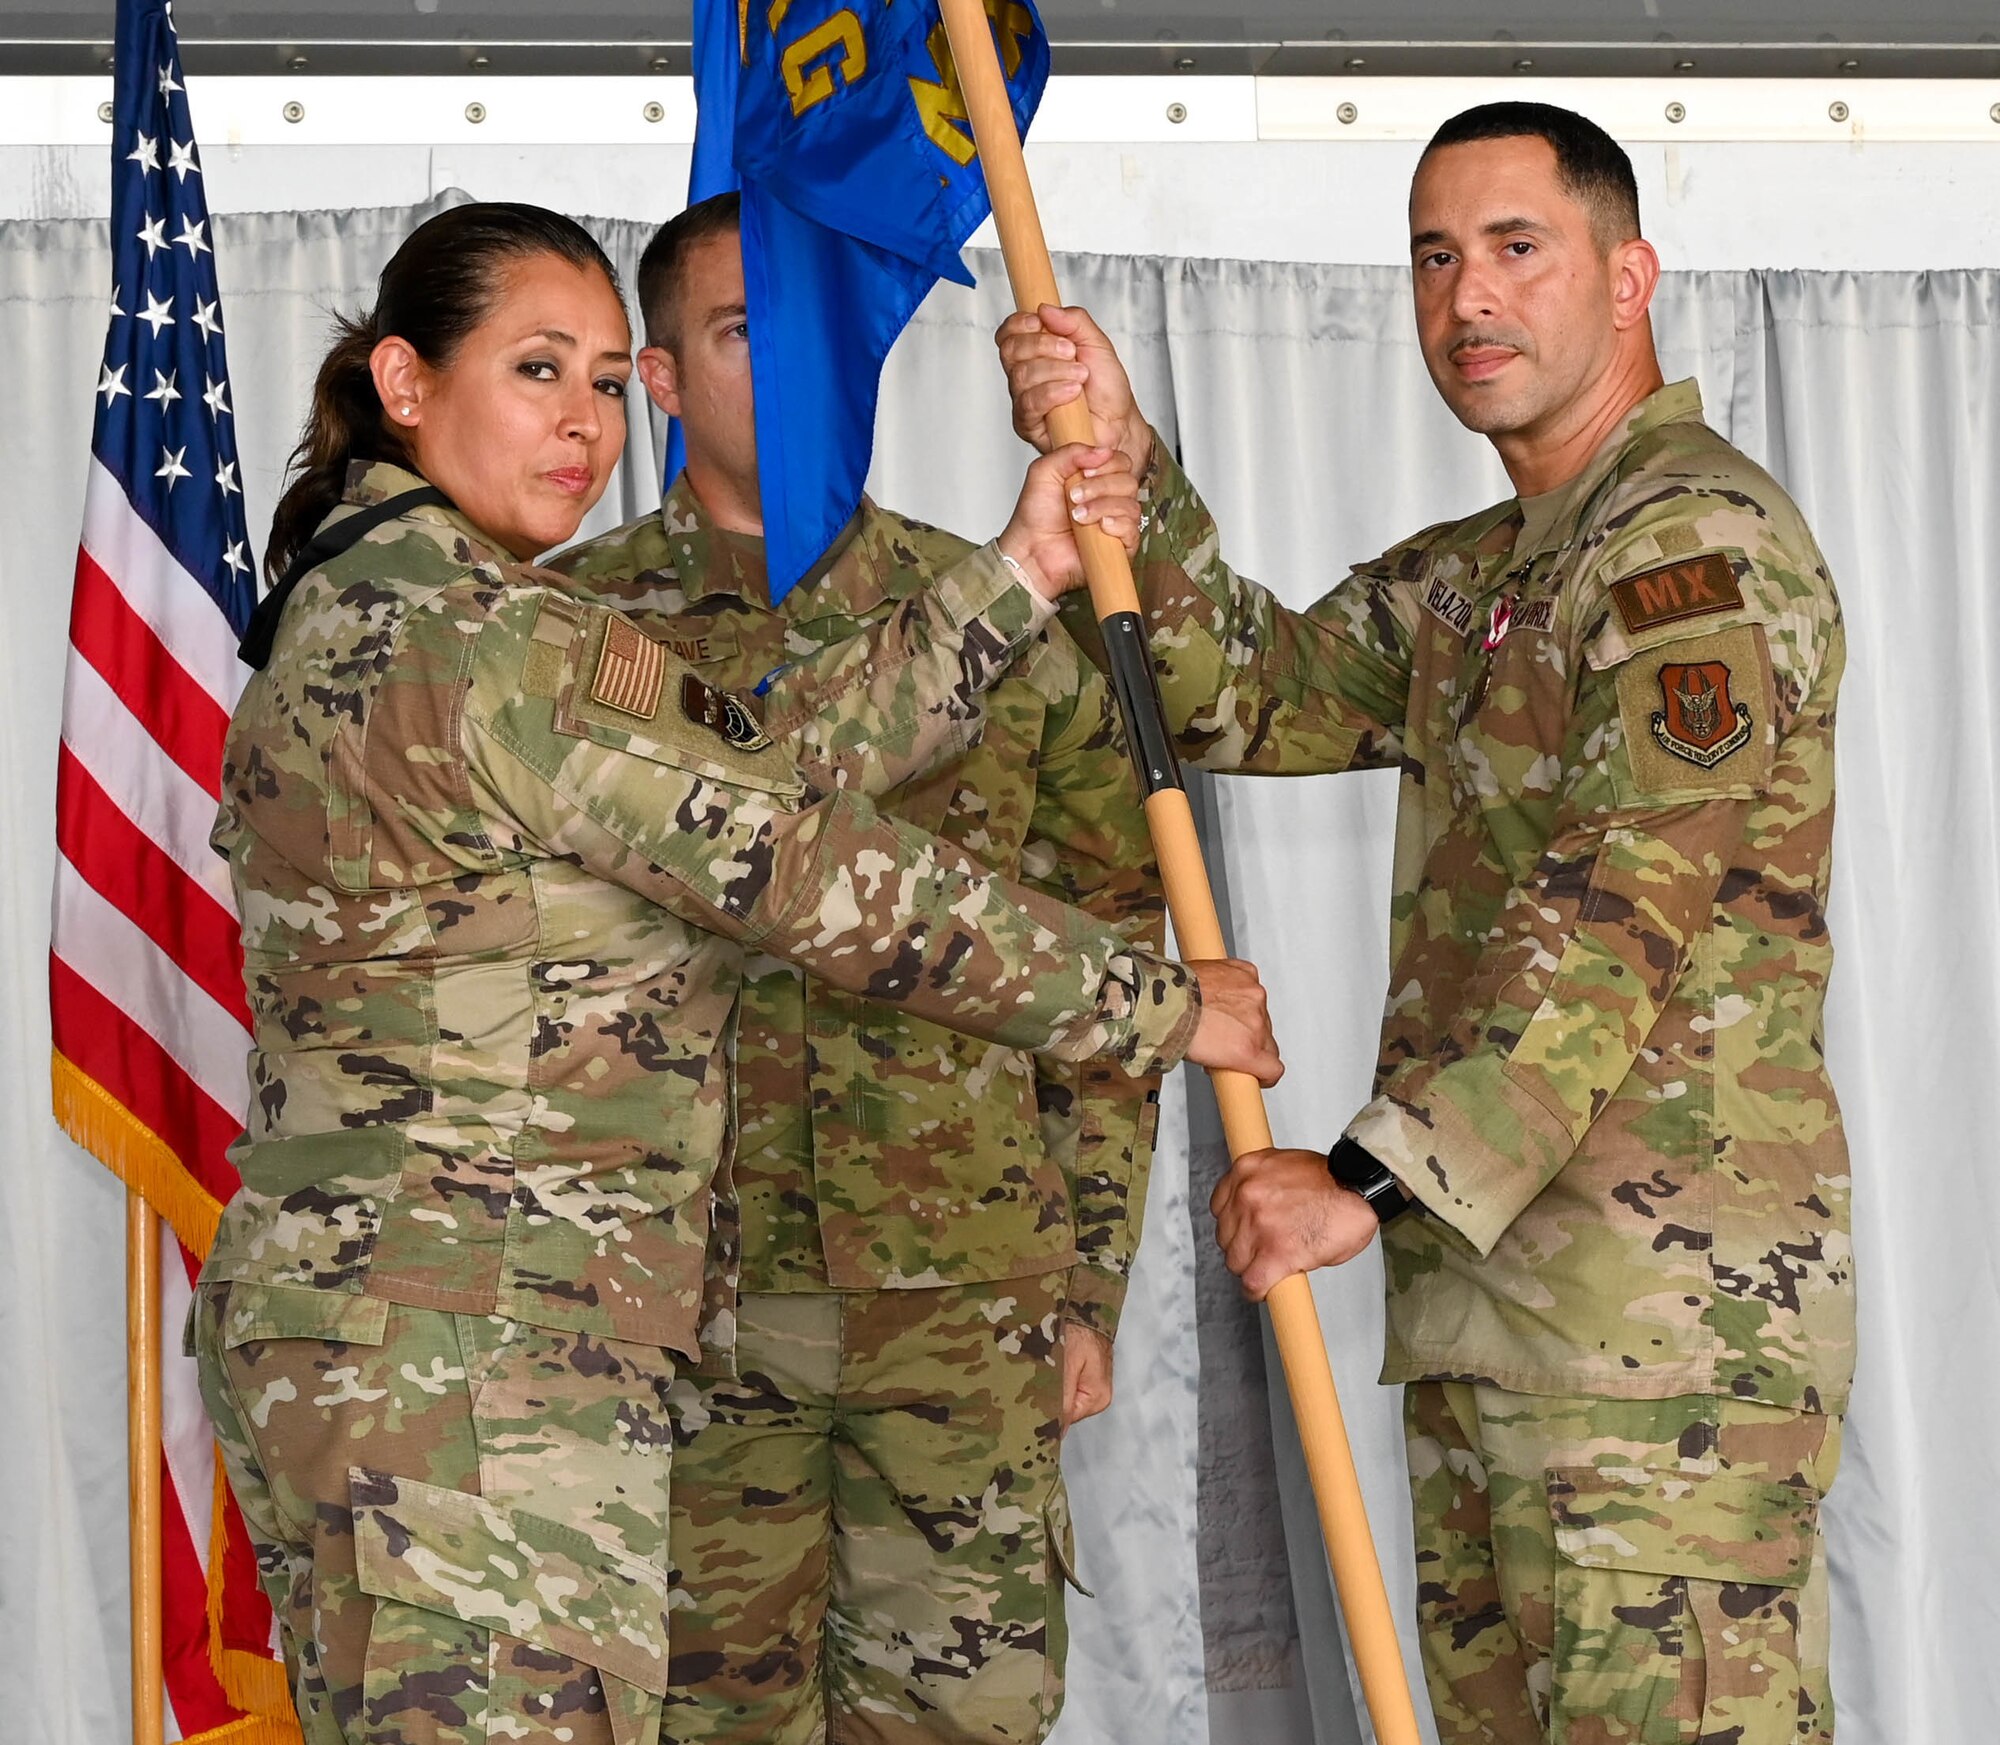 Lt. Col. Carla Martinez, 433rd Maintenance Group commander, presents the 433rd Aircraft Maintenance Squadron guidon to Maj. Nicholas Velazquez Jr. during the 433rd AMXS change of command ceremony at Joint Base San Antonio-Lackland, Texas, Sept. 10, 2022. Velazquez previously served as the 433rd Maintenance Squadron Commander in the 433rd Airlift Wing. (U.S. Air Force photo by Airman 1st Class Mark Colmenares)